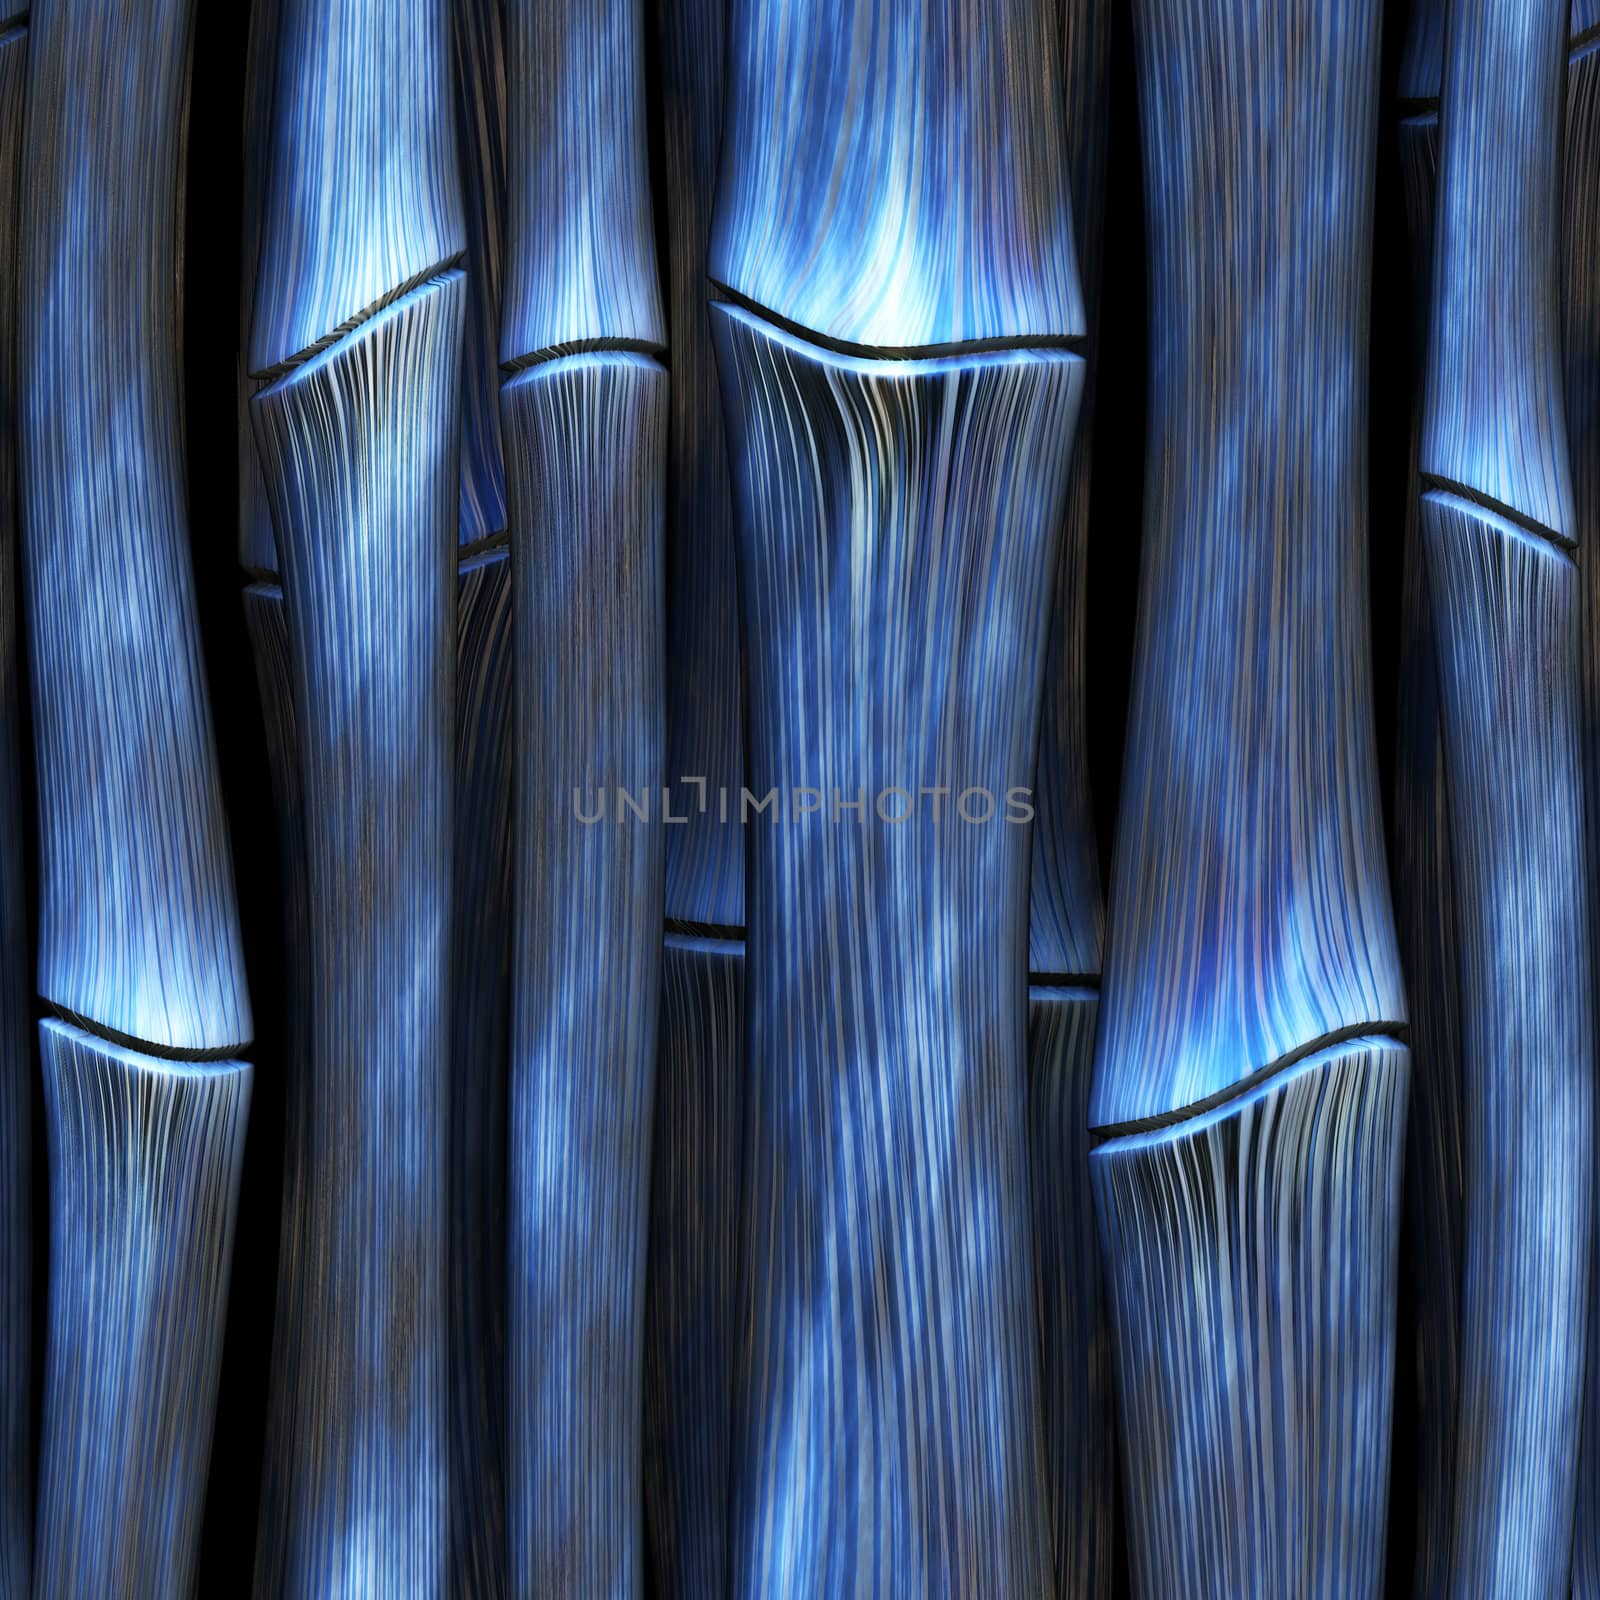 
blue bamboo background with shadows, tiles seamlessly